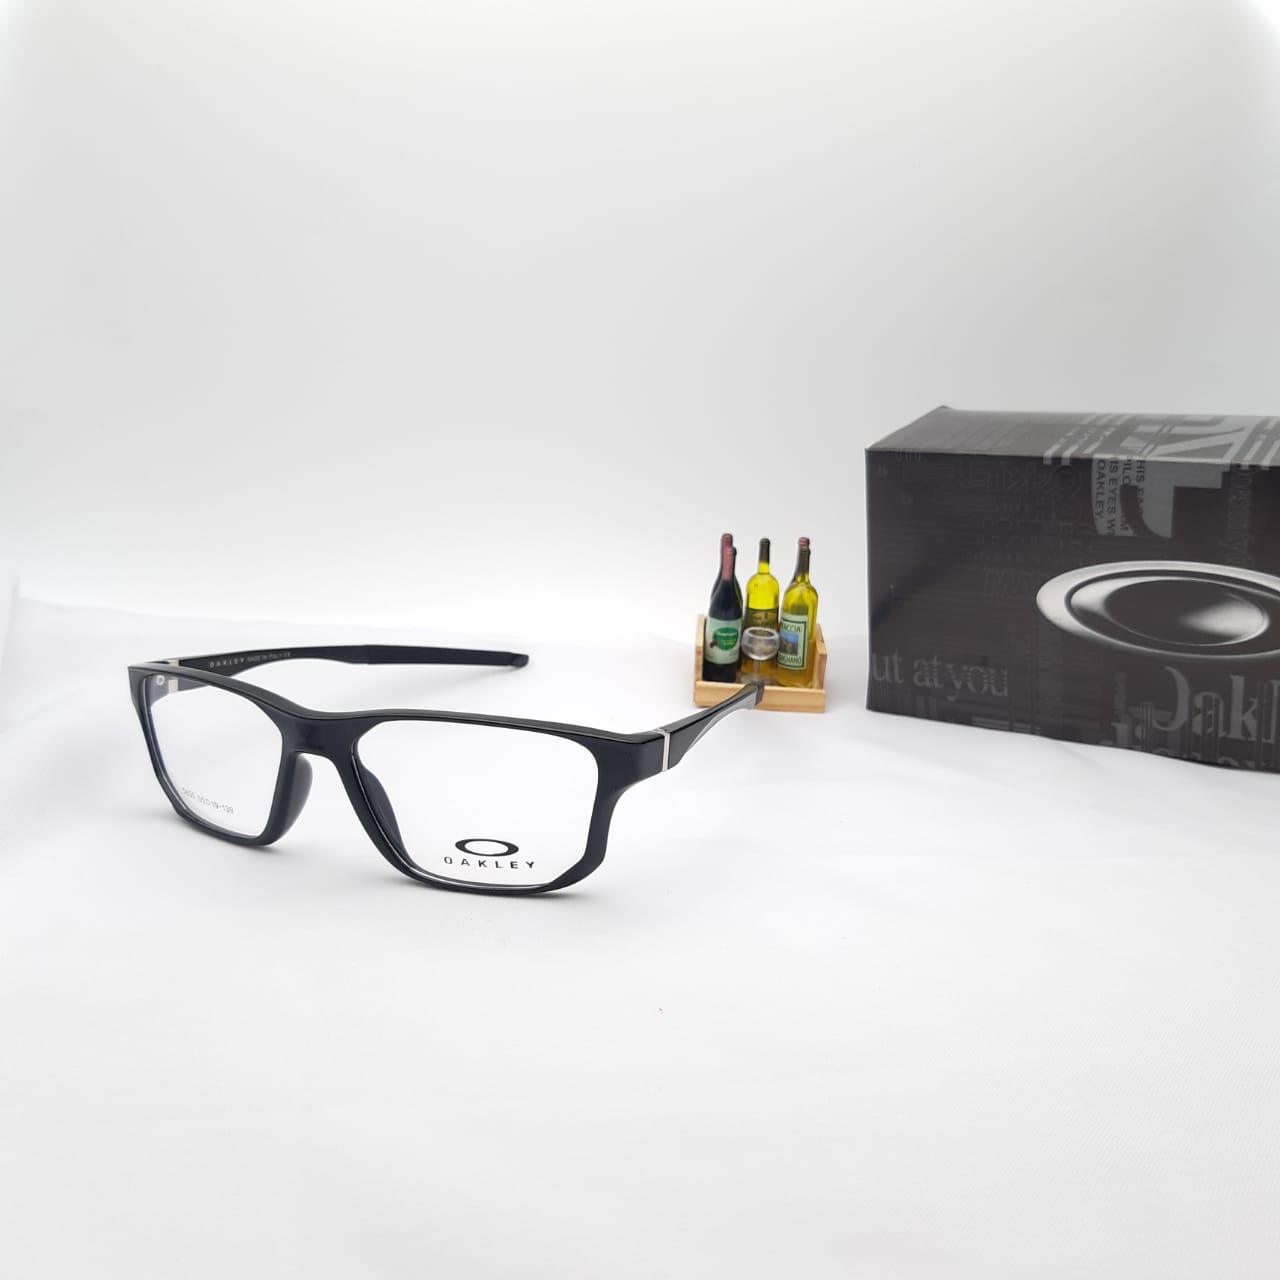 Oakley spectacles - Customized Prescription Sunglasses and Spectacles